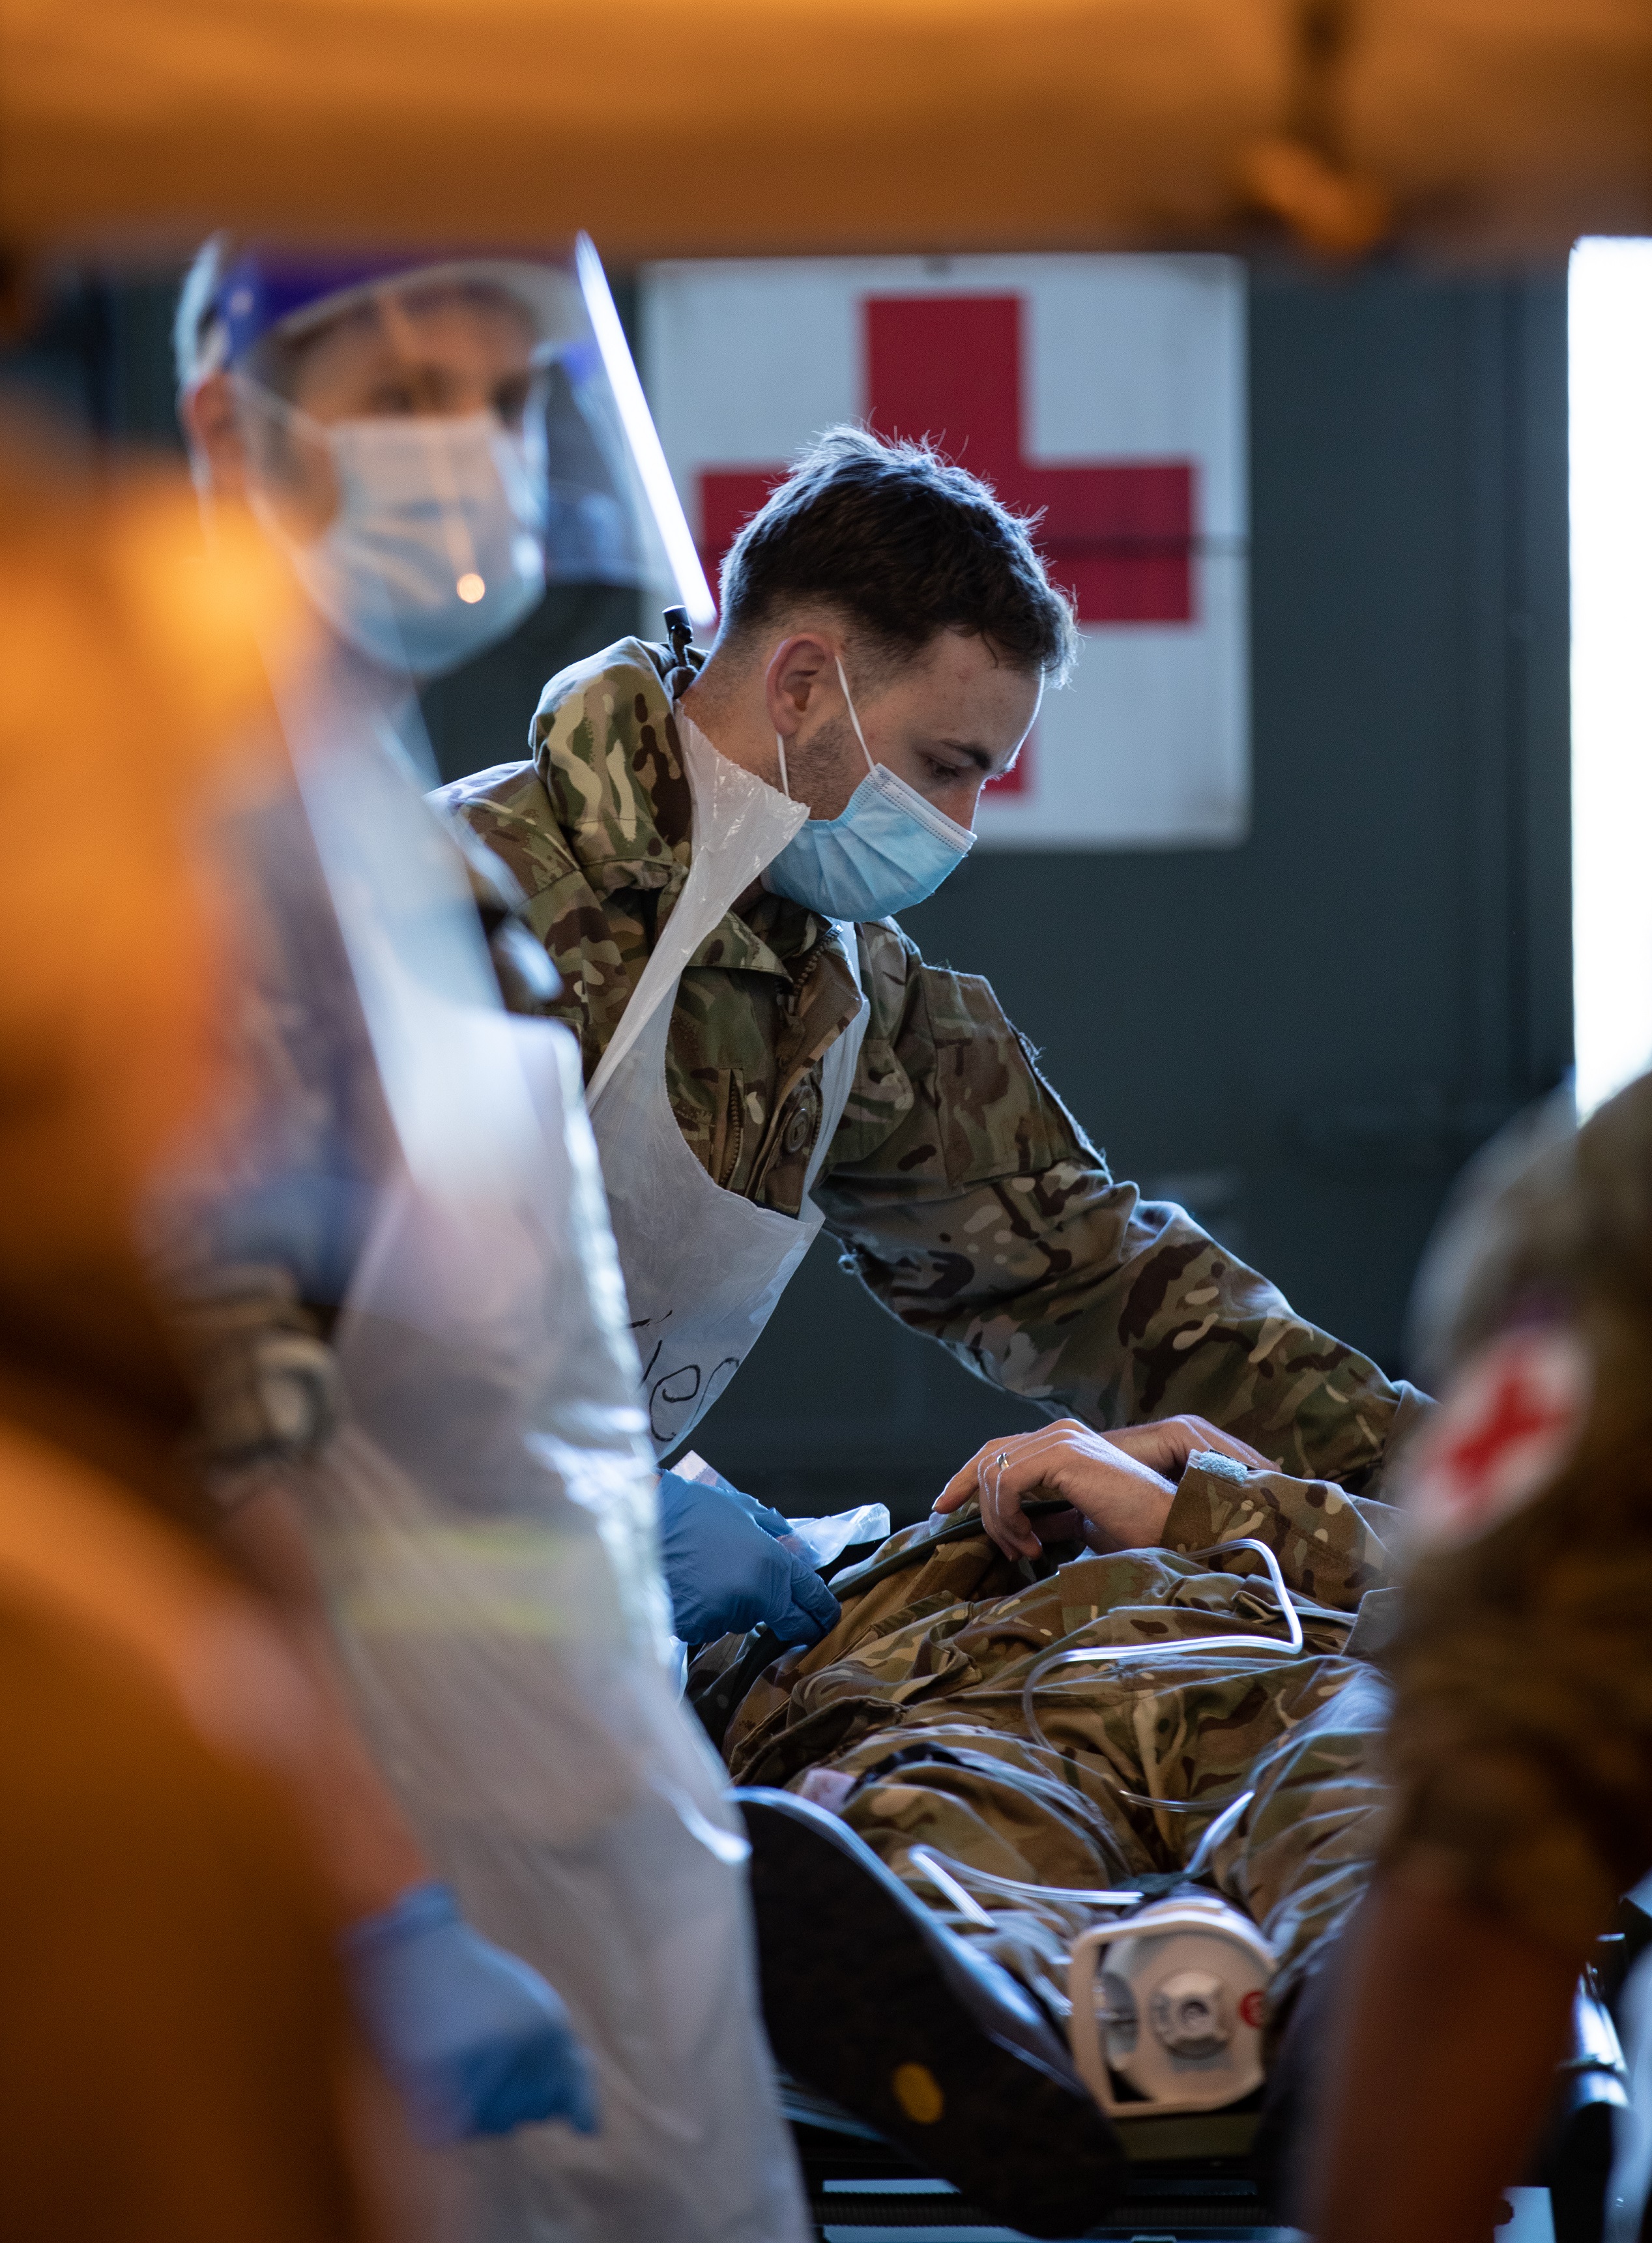 Personnel from RAF Tactical Medical Wing in training during Exercise Agile Pirate